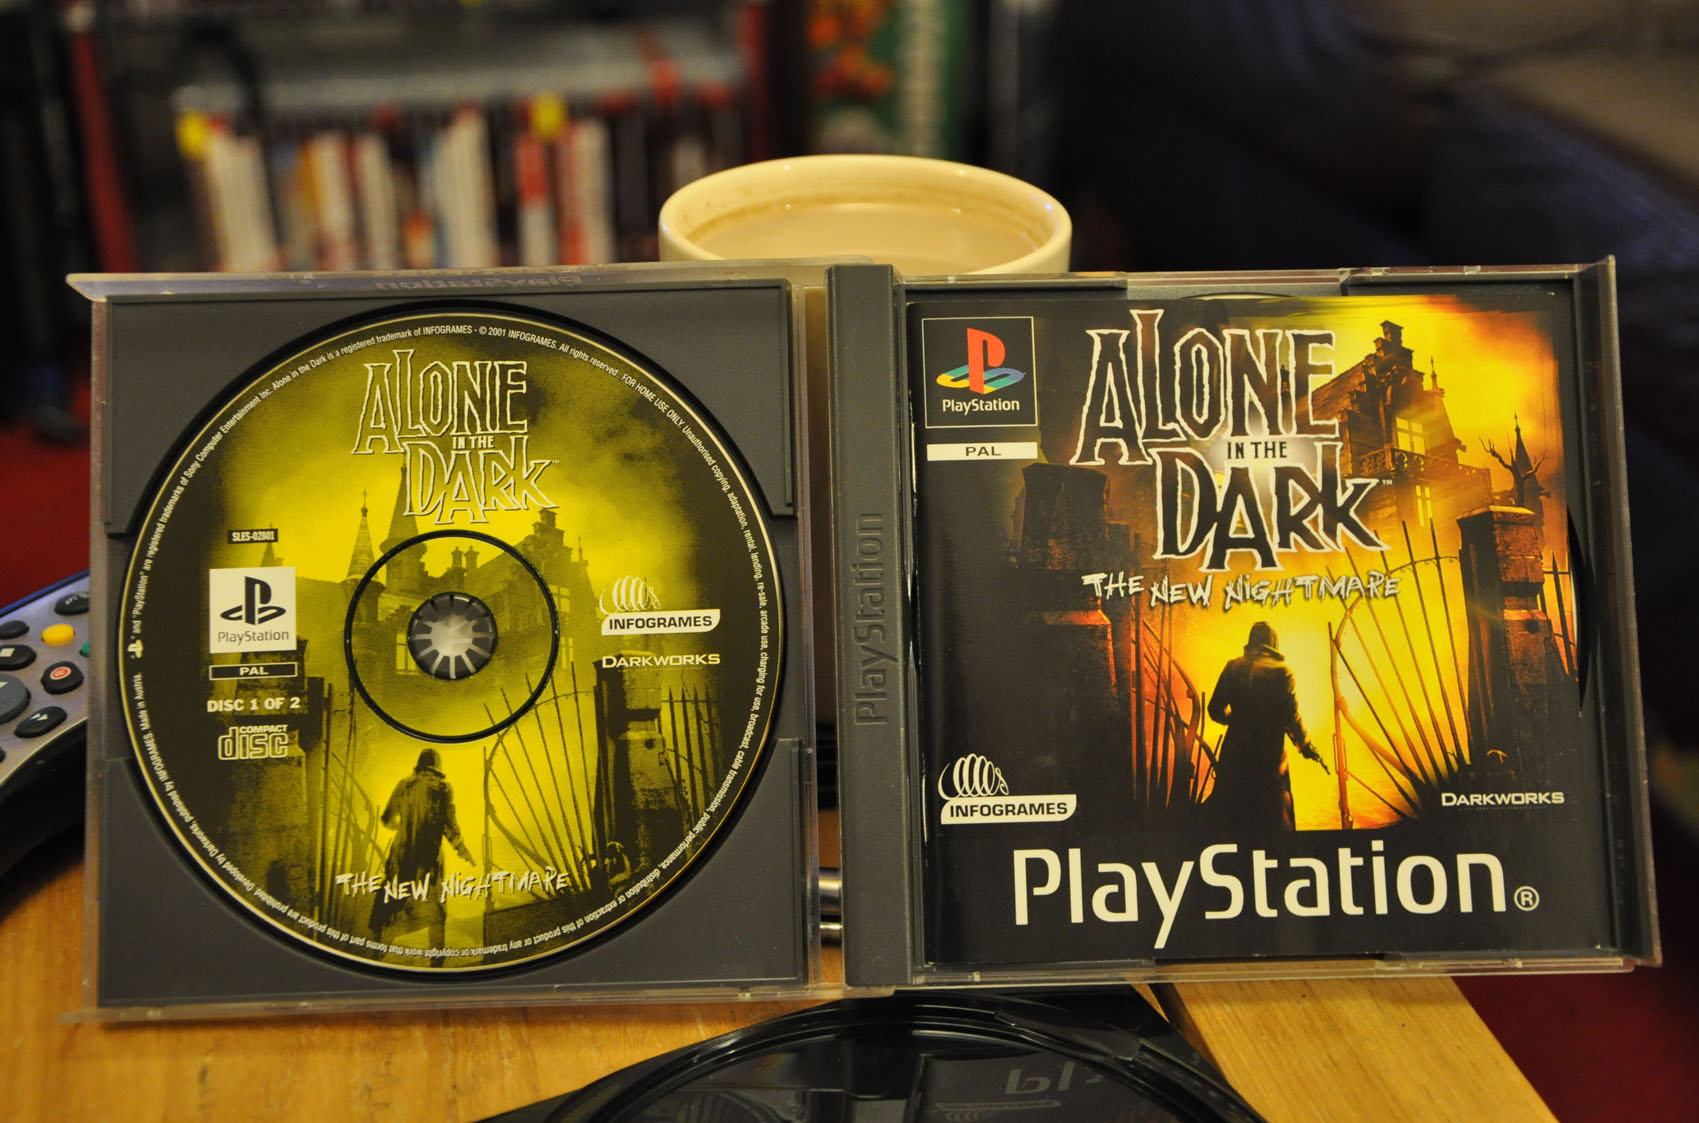 Alone in the dark ps4. Alone in the Dark ps1. Alone in the Dark 4 ps1. Alone the Dark ps1. Alone in the Dark the New Nightmare ps1.